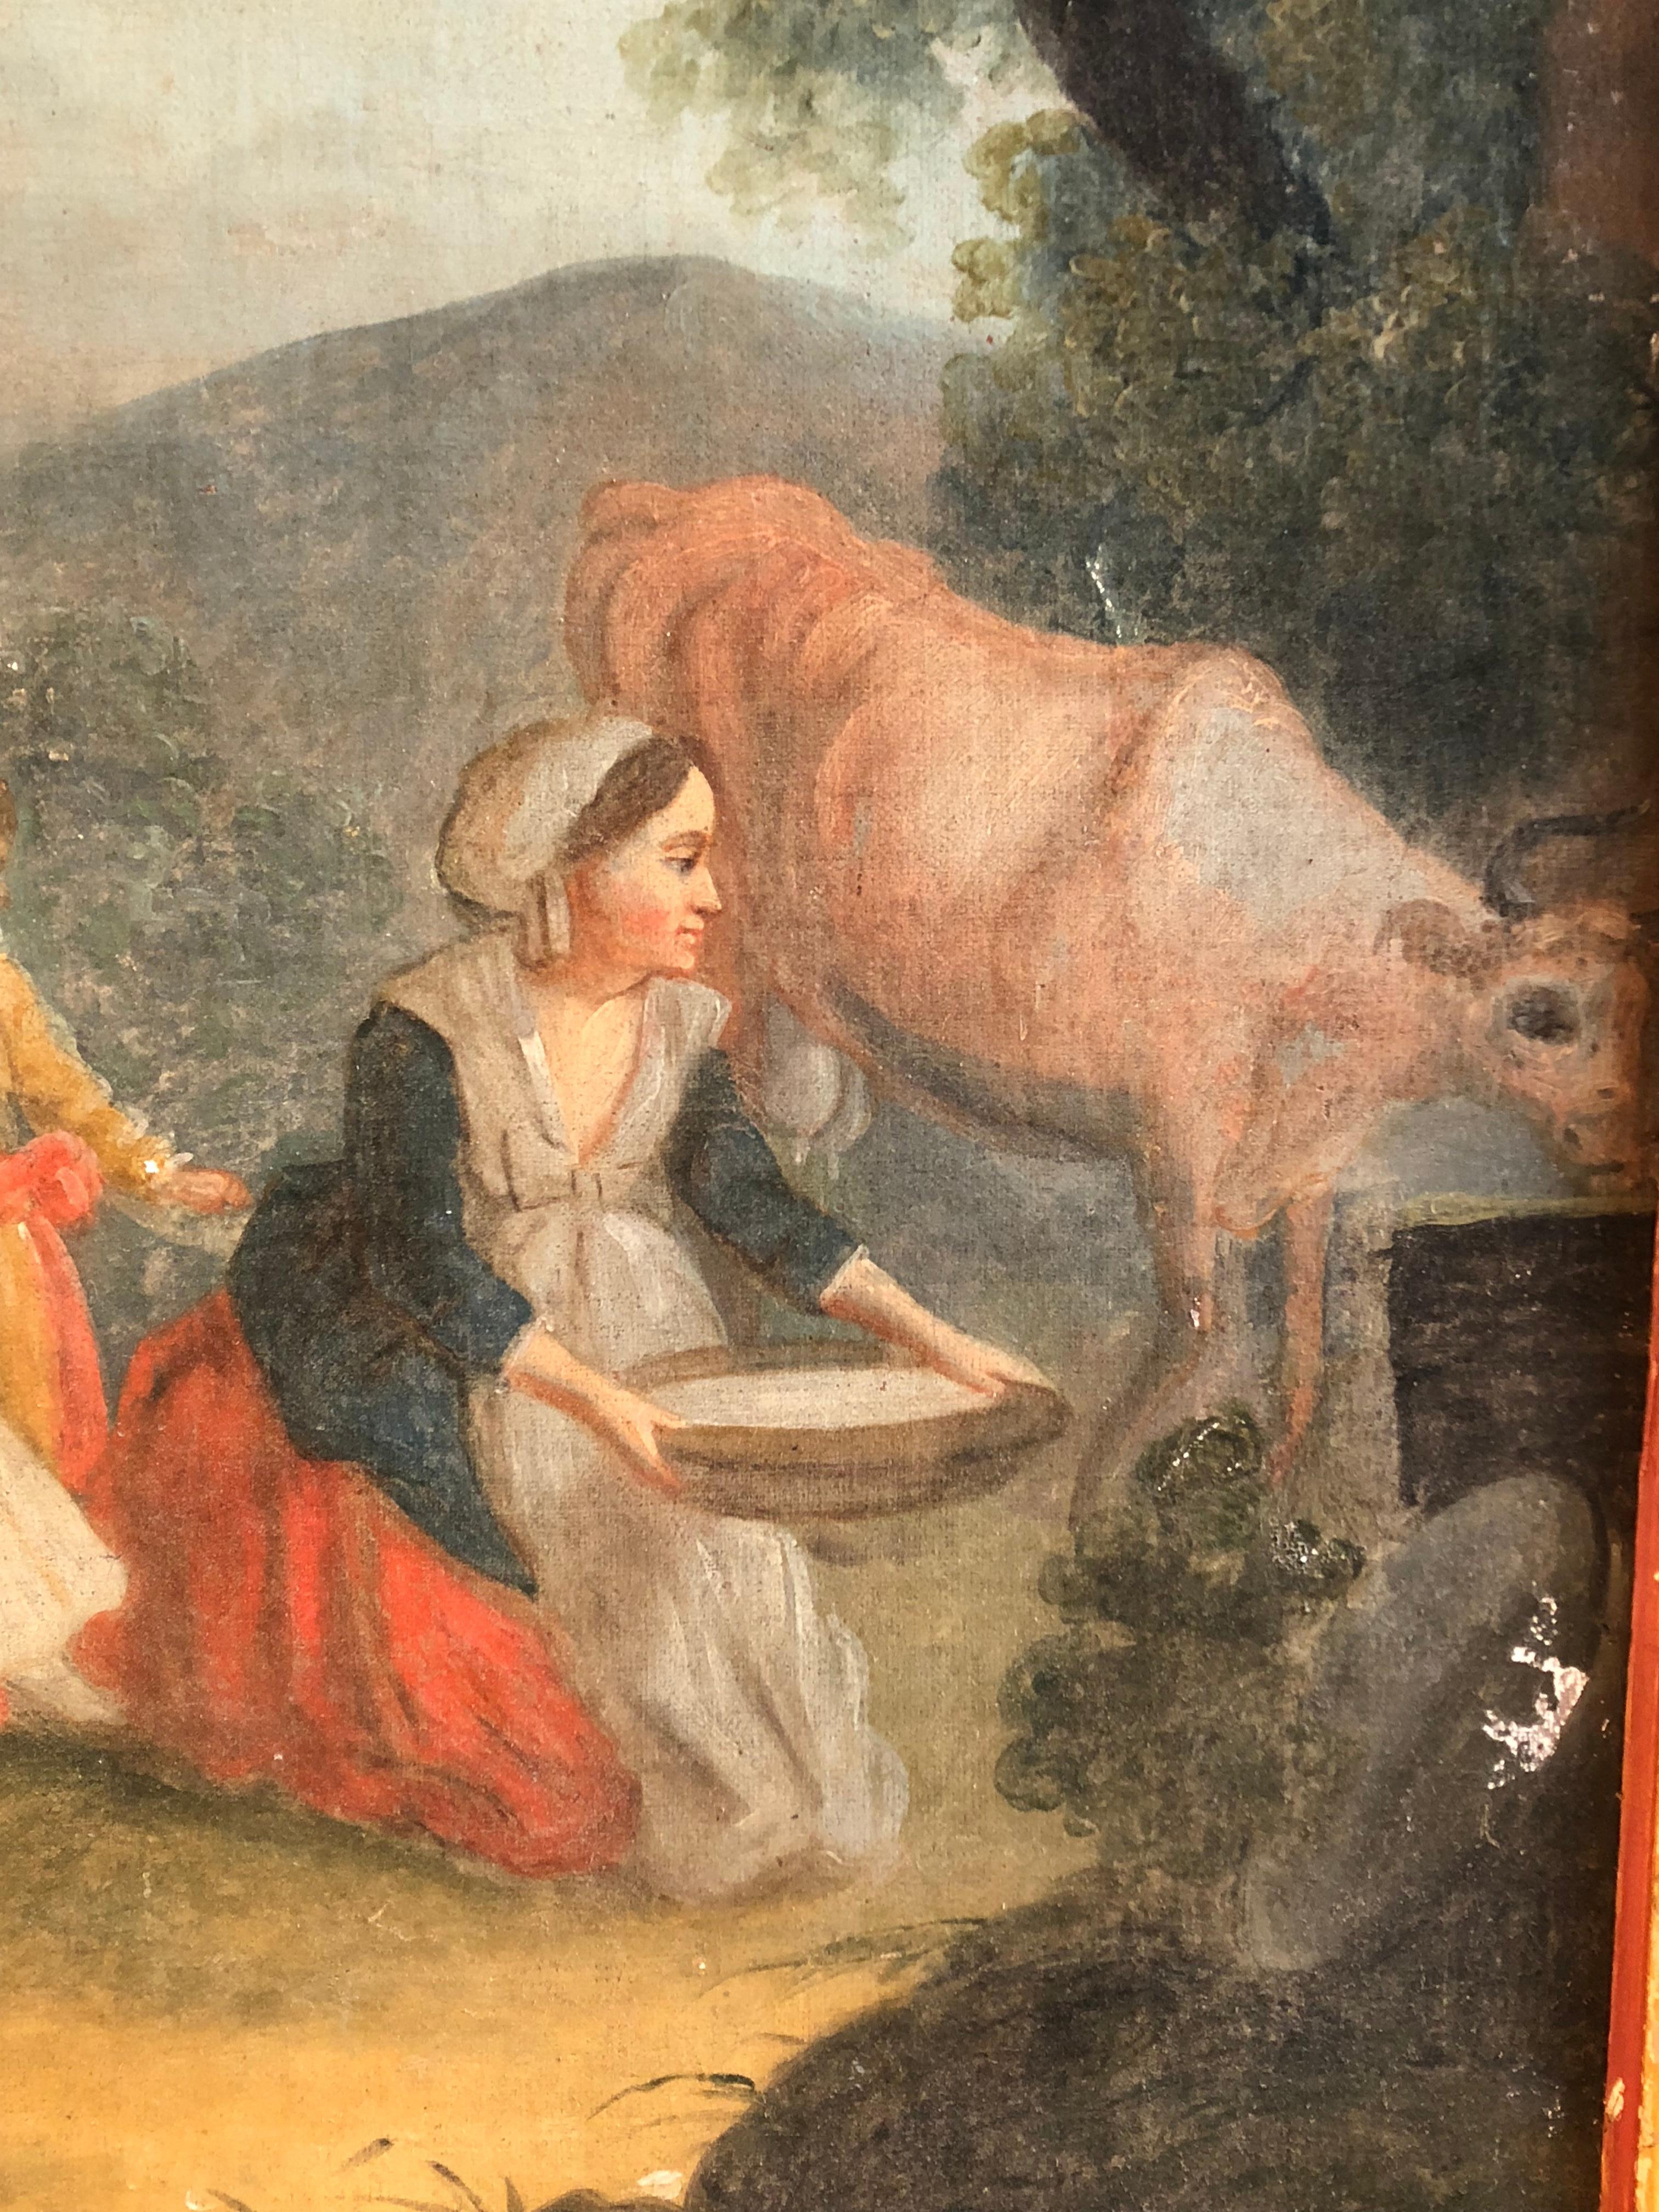 Painted French Provincial Farm Scene, Marie Antoinette, 18th C.